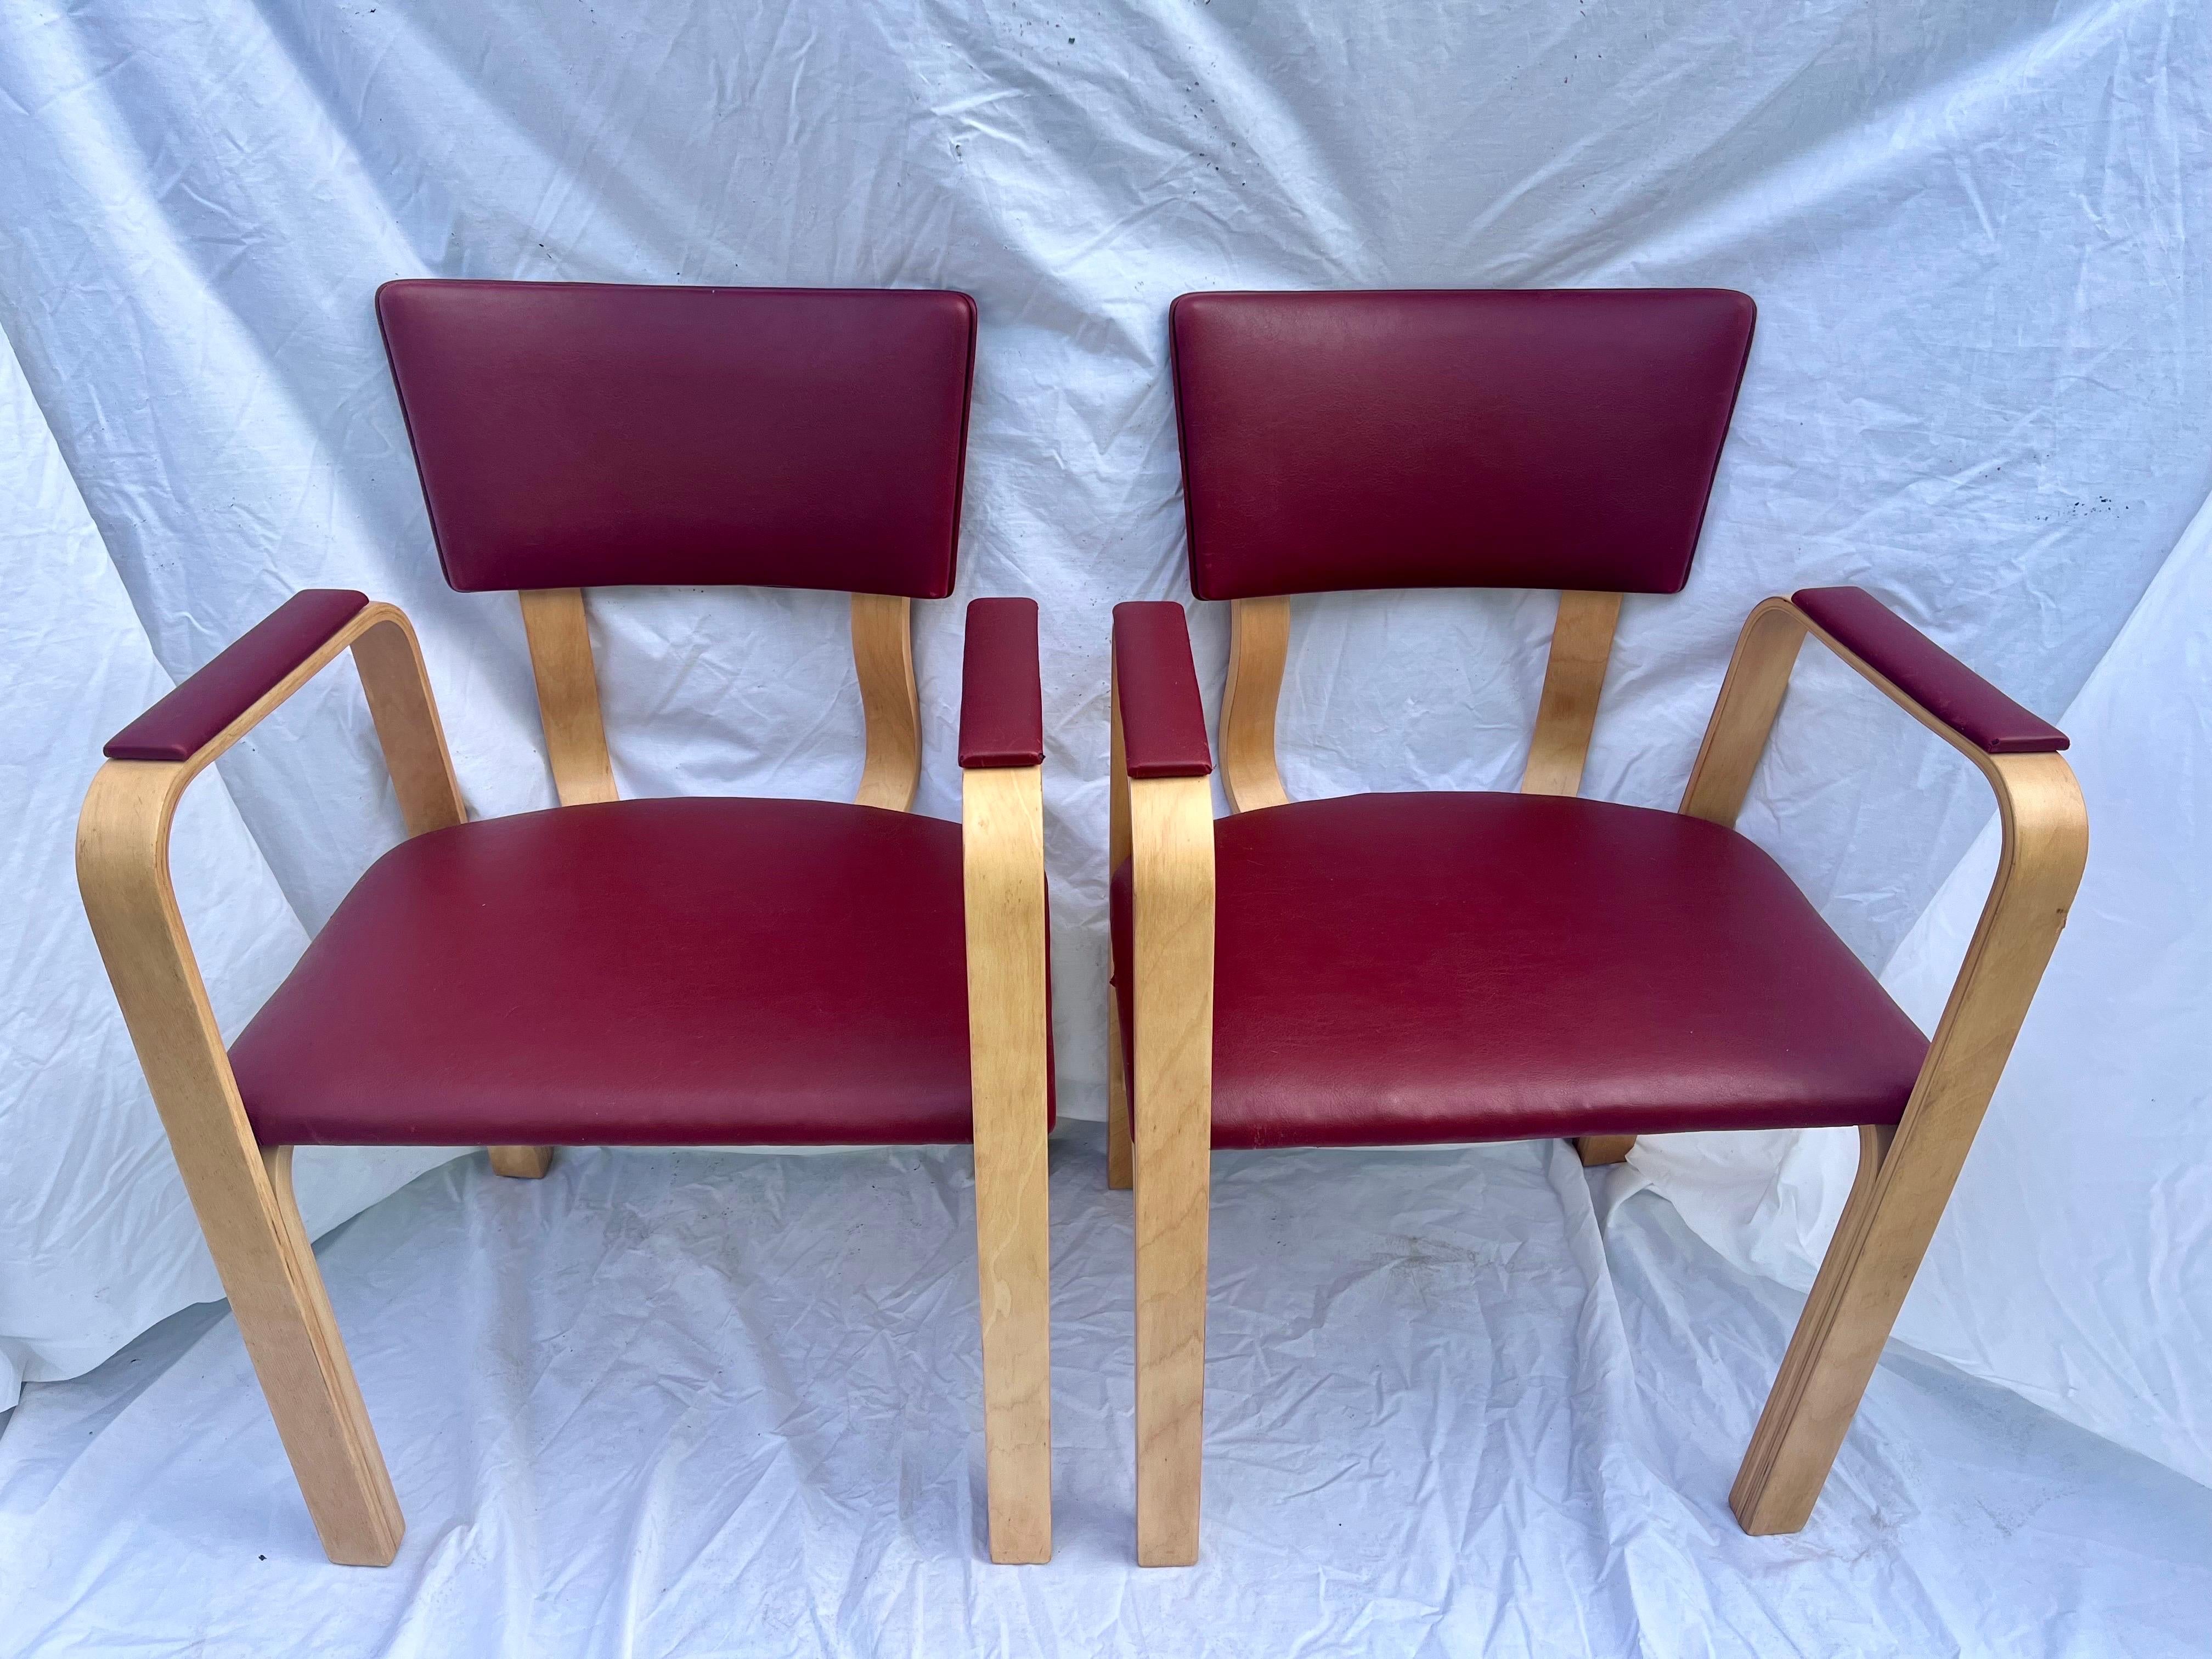 A timeless set of four arm or dining chairs by Thonet Park Avenue in New York City. The set of four chairs is labeled under the seats. The vintage upholstery is red in color and cotton felt. I was researching the history of Thonet and would like  to